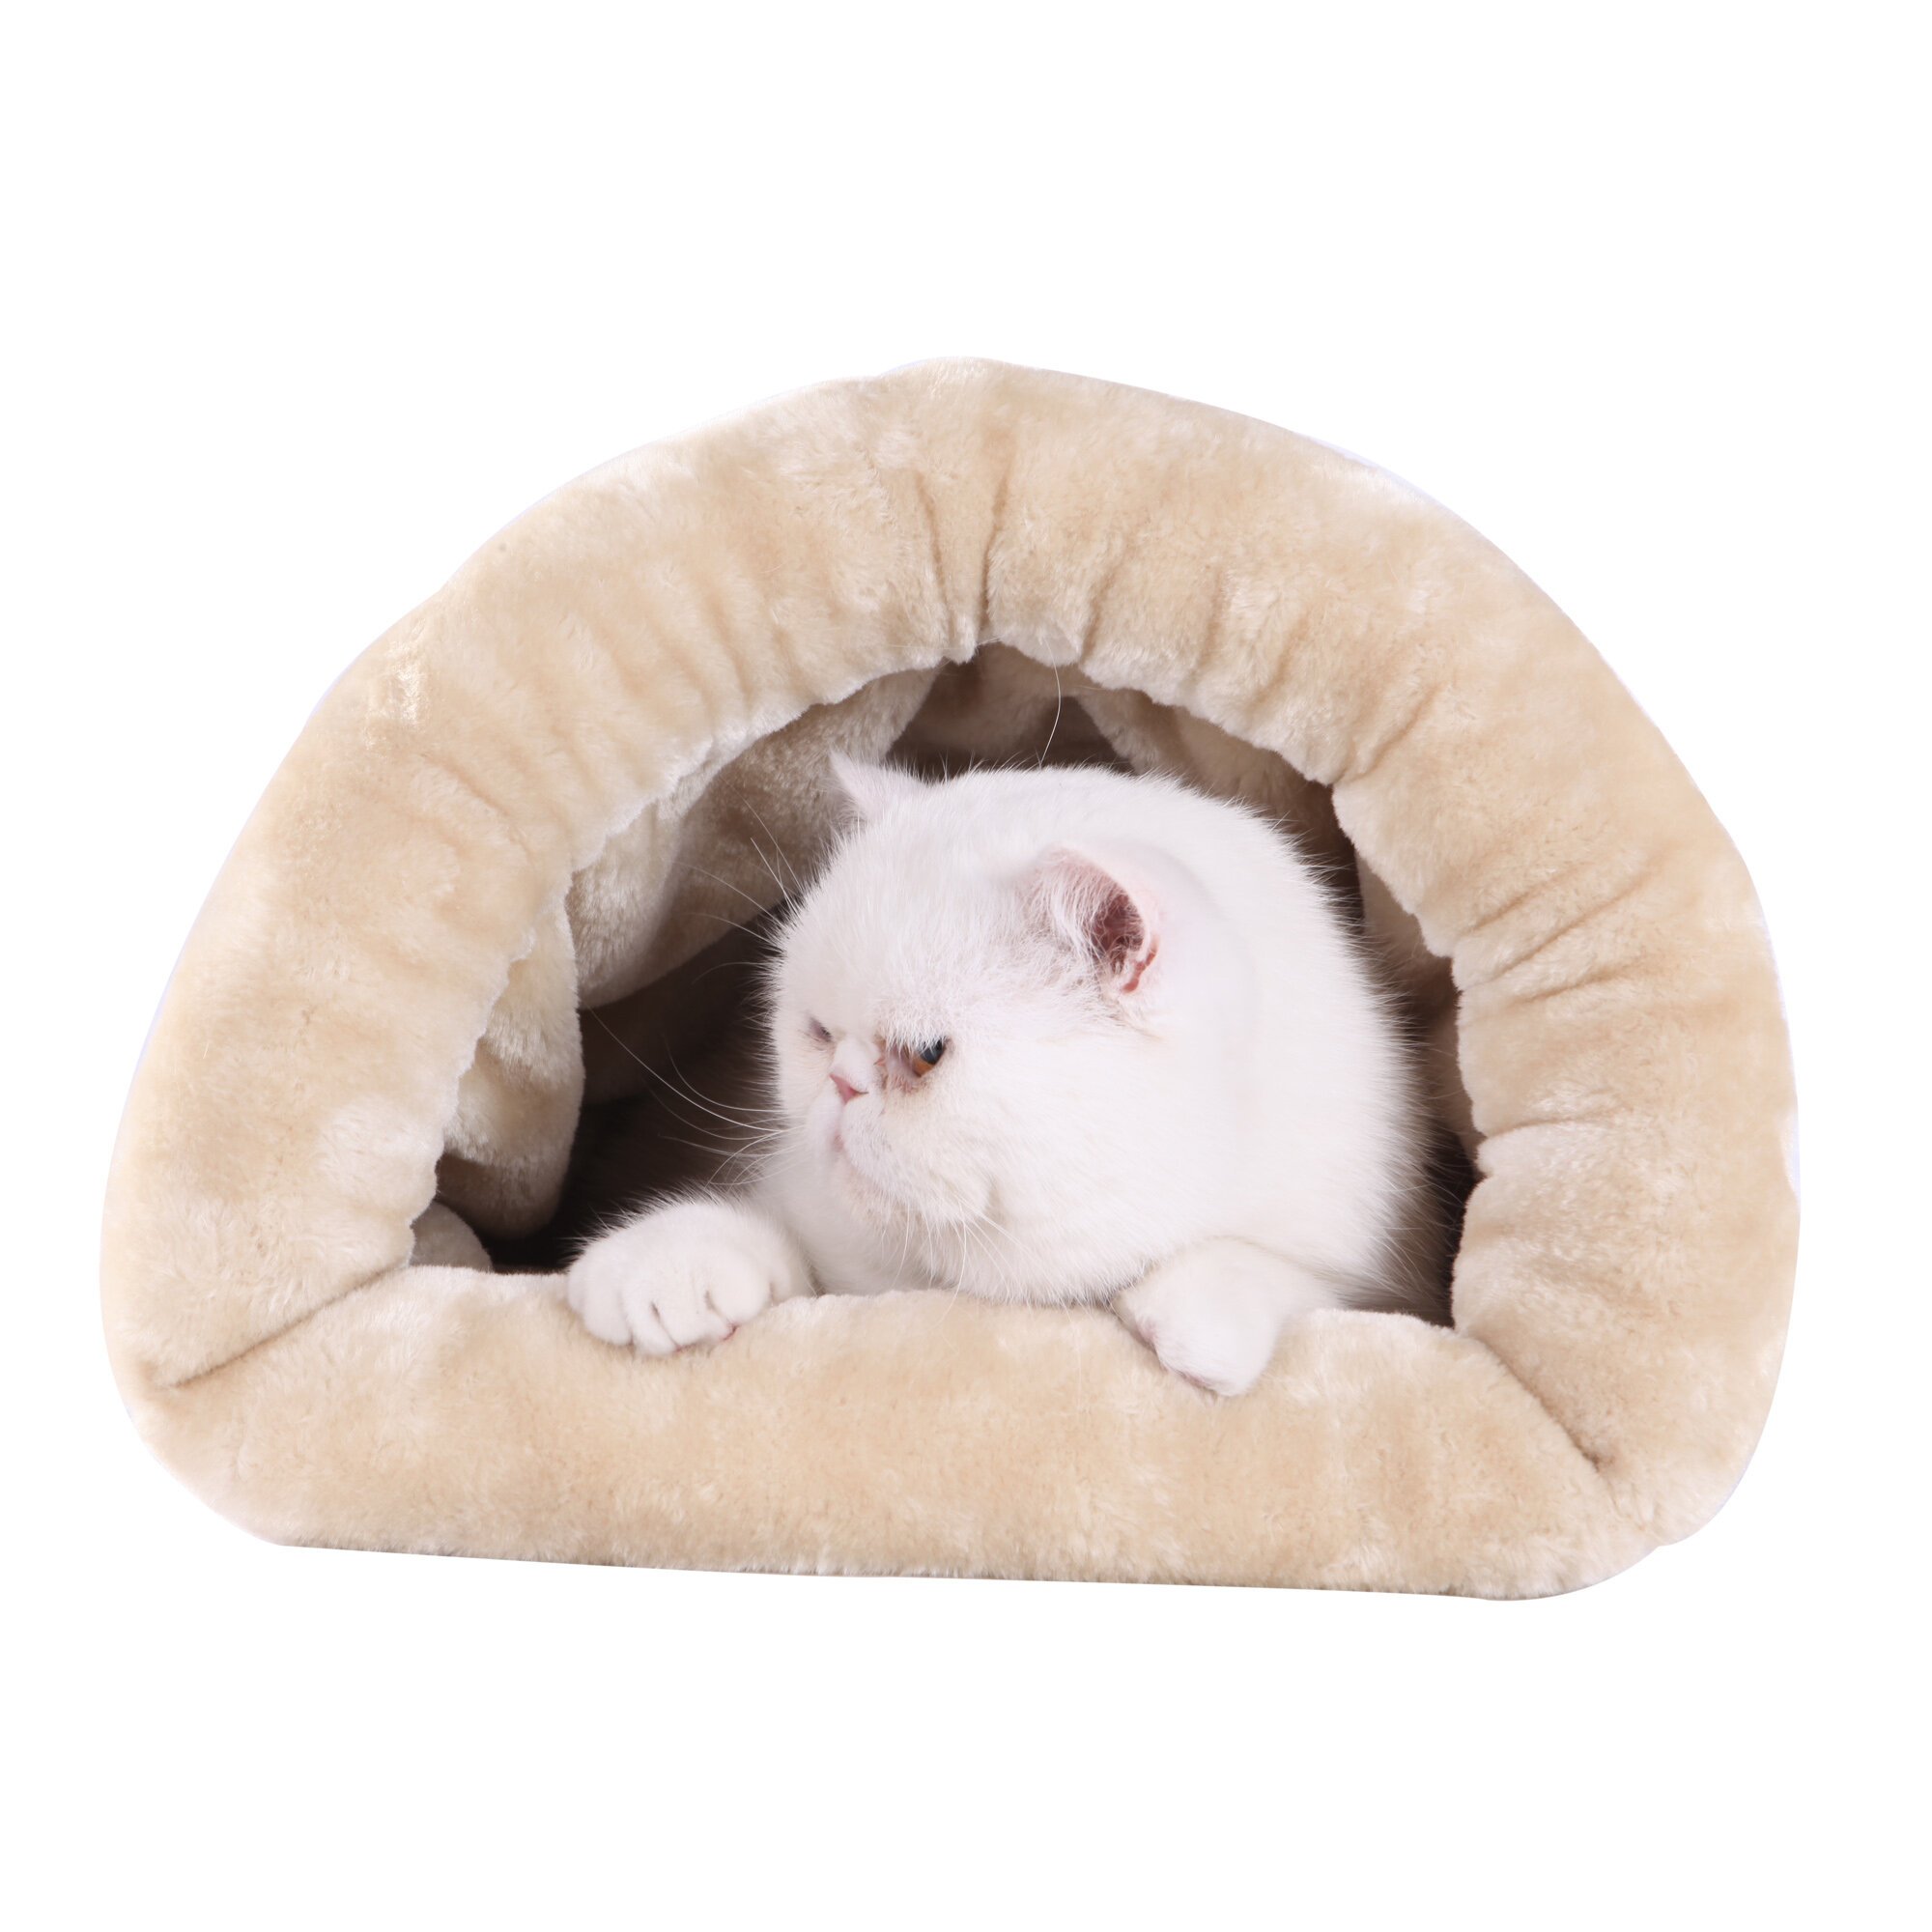 Armarkat Indian Red Cat Bed Size 